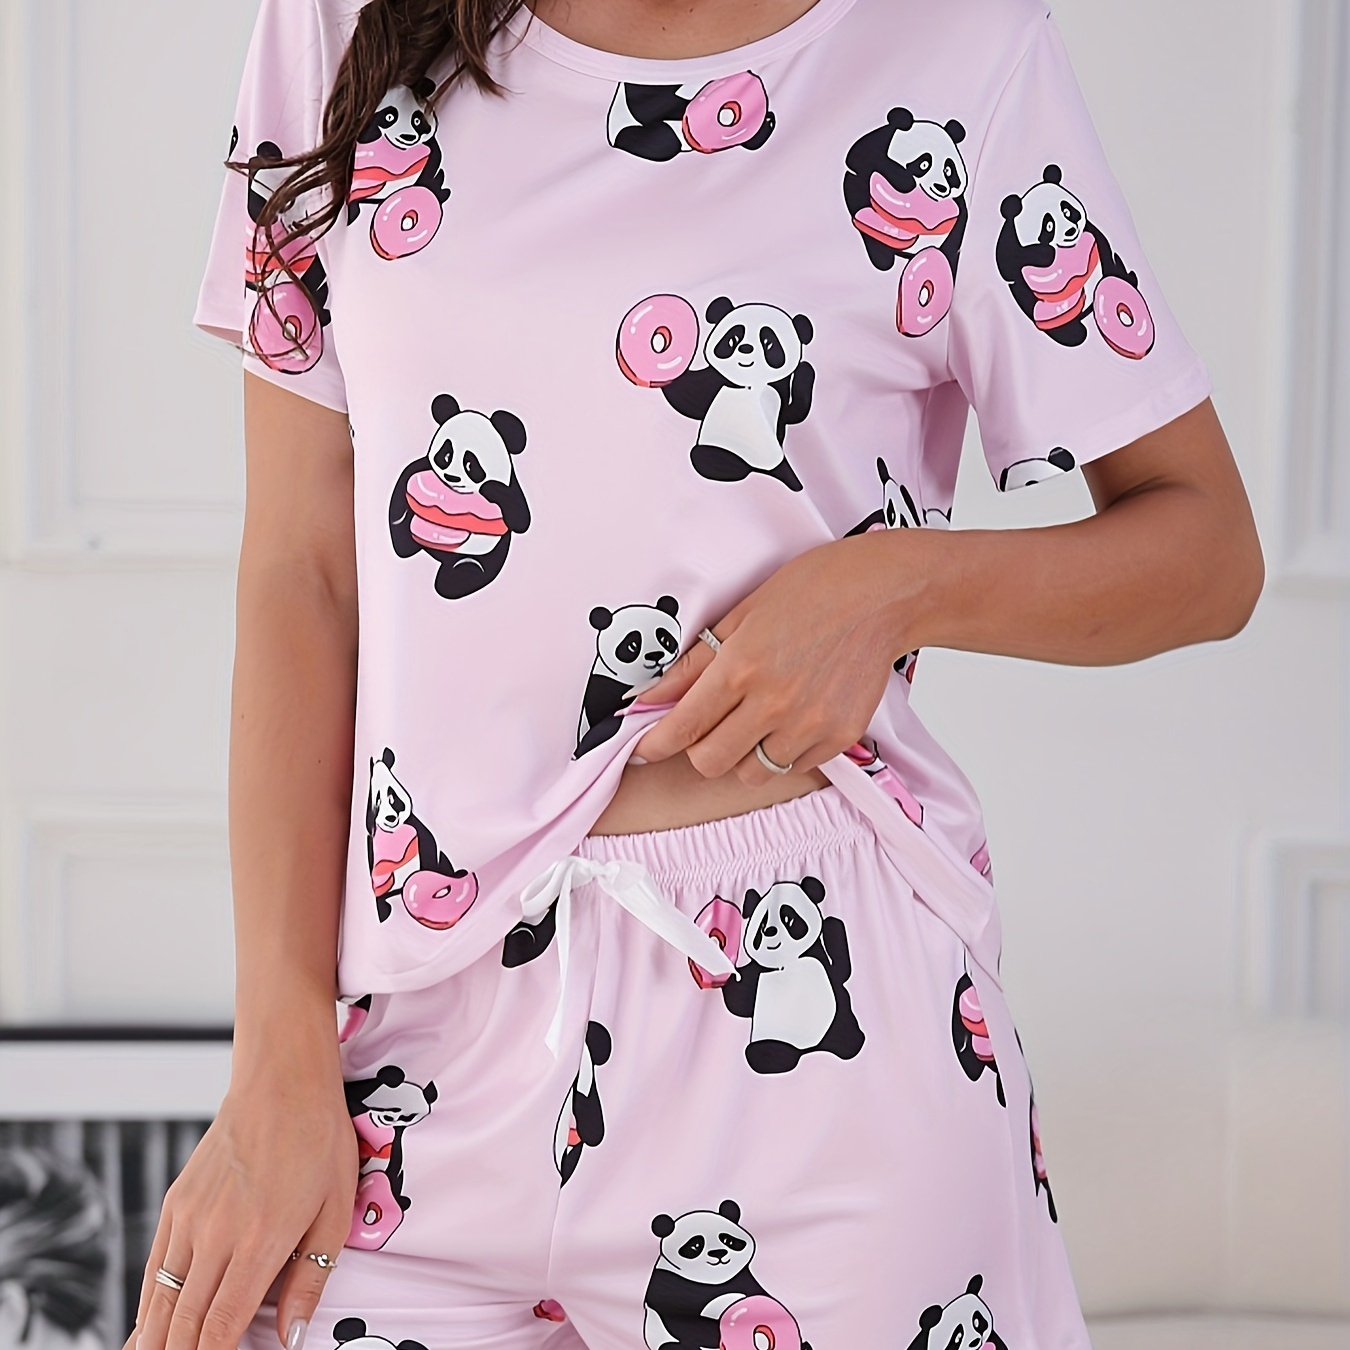 

Women's Cute Panda With Donut Print Pajama Set, Short Sleeve Round Neck Top & Shorts, Comfortable Relaxed Fit, Summer Nightwear